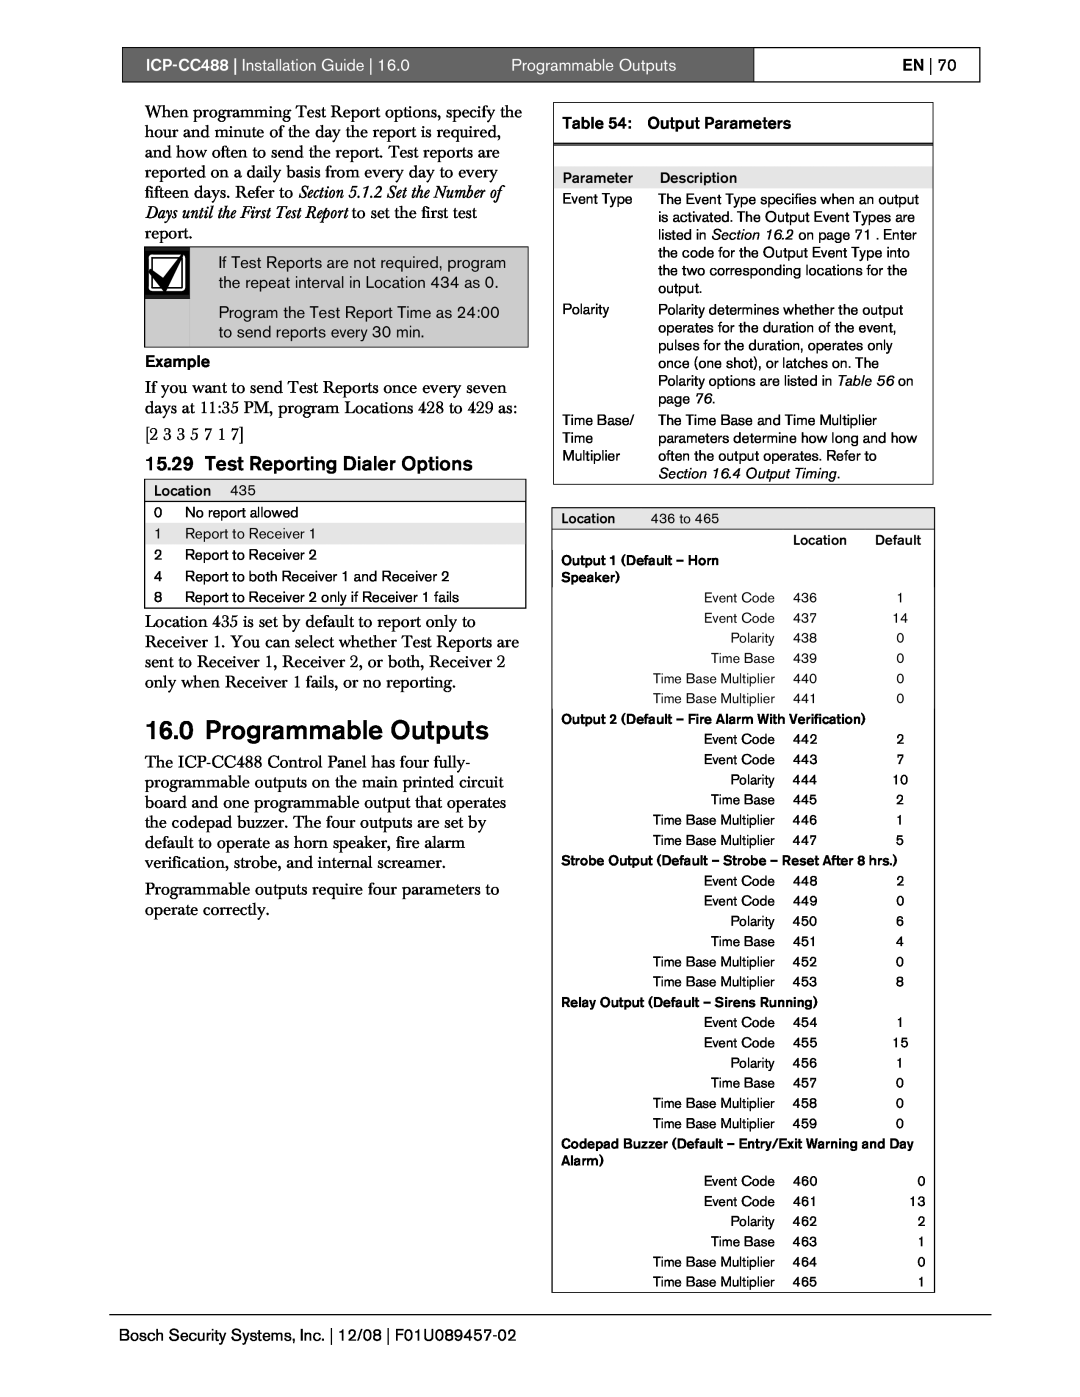 Bosch Appliances manual Programmable Outputs, Test Reporting Dialer Options, ICP-CC488 Installation Guide 